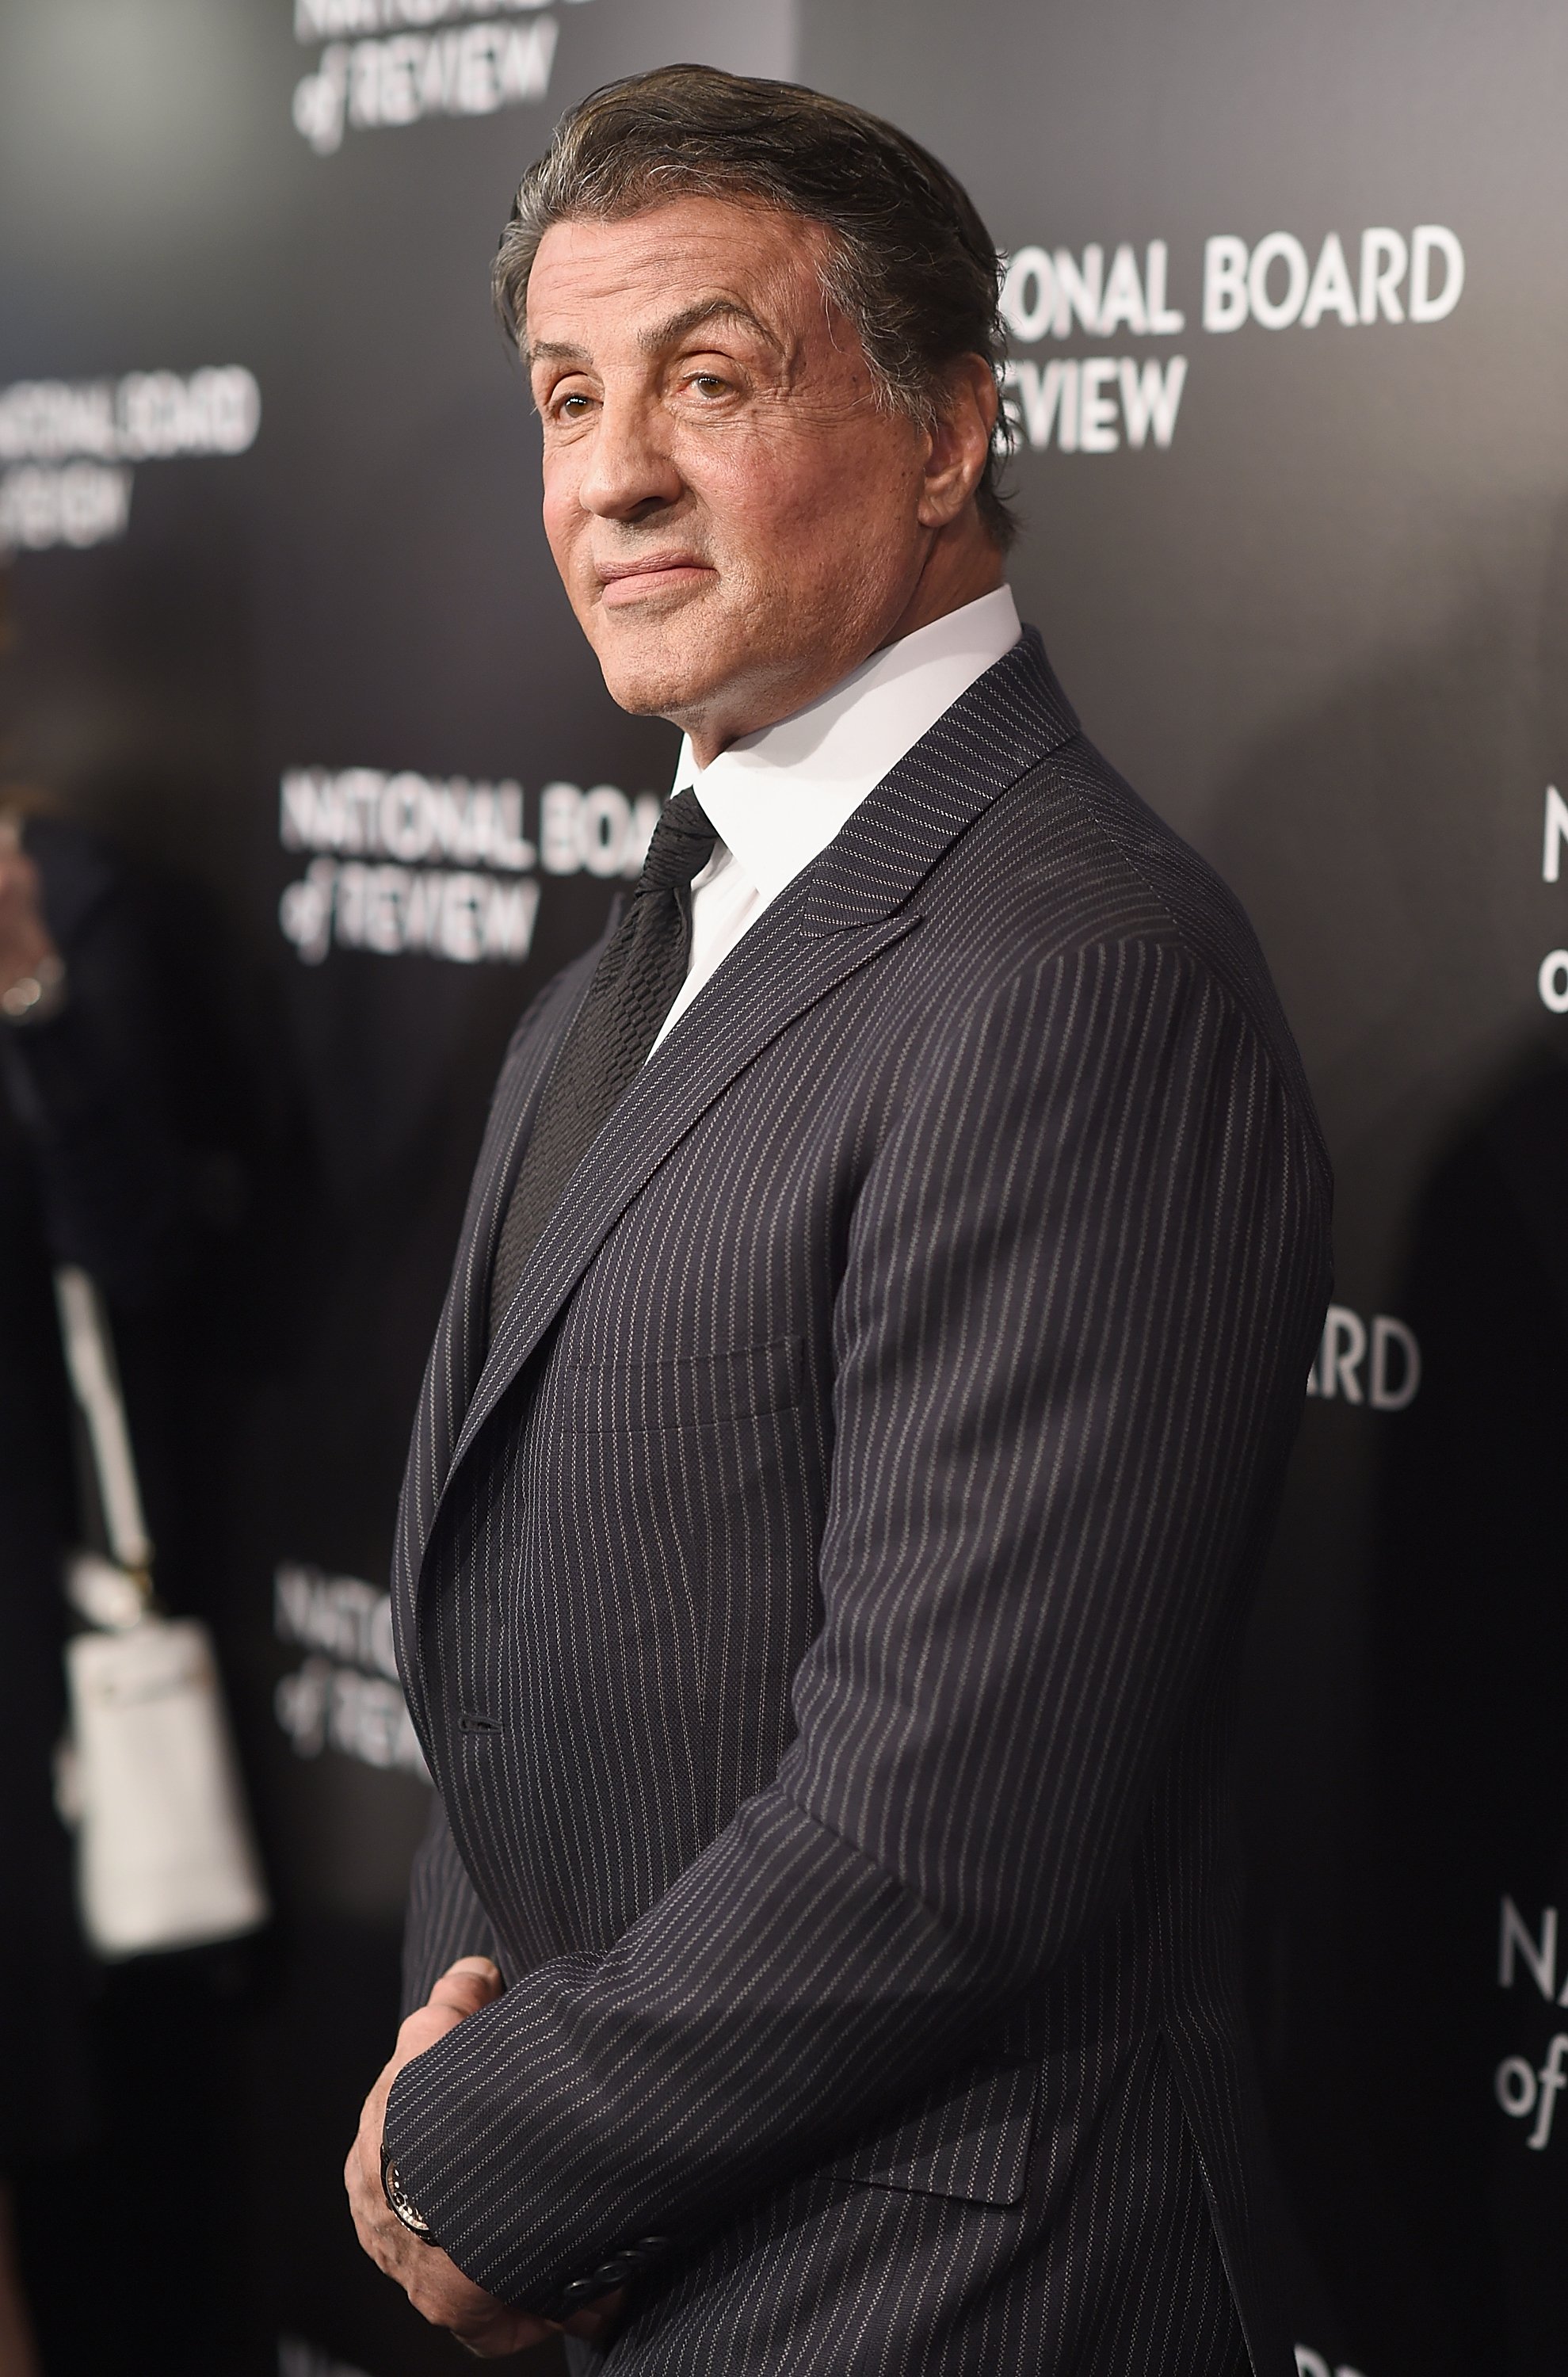 Sylvester Stallone attends the 2015 National Board of Review Gala at Cipriani 42nd Street on January 5, 201,6 in New York City. | Source: Getty Images.